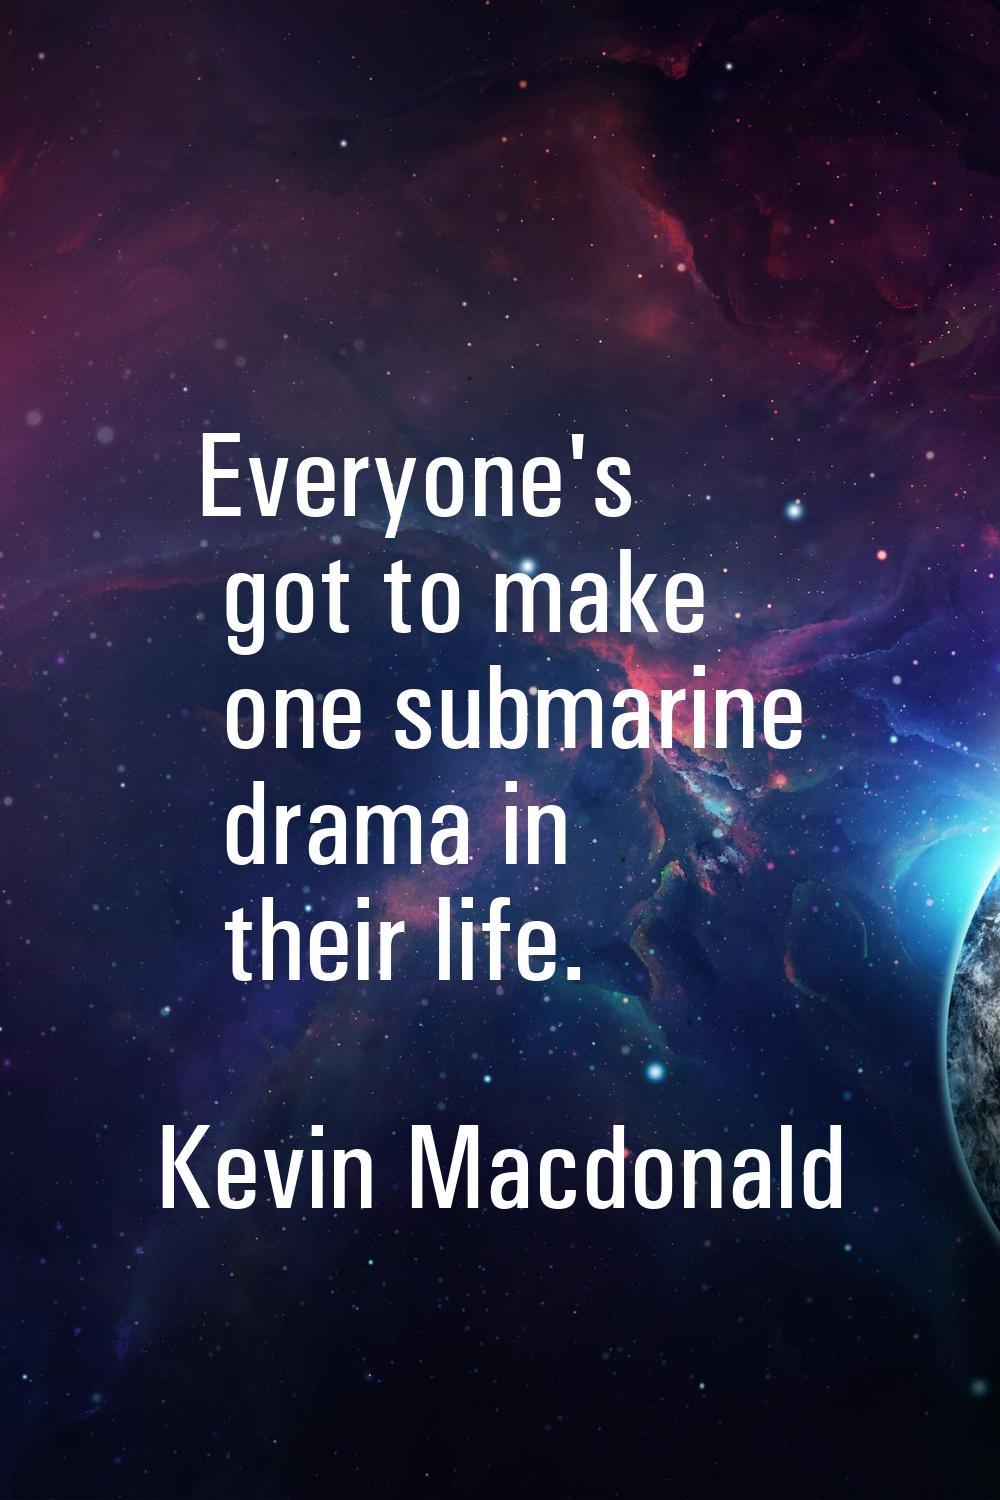 Everyone's got to make one submarine drama in their life.